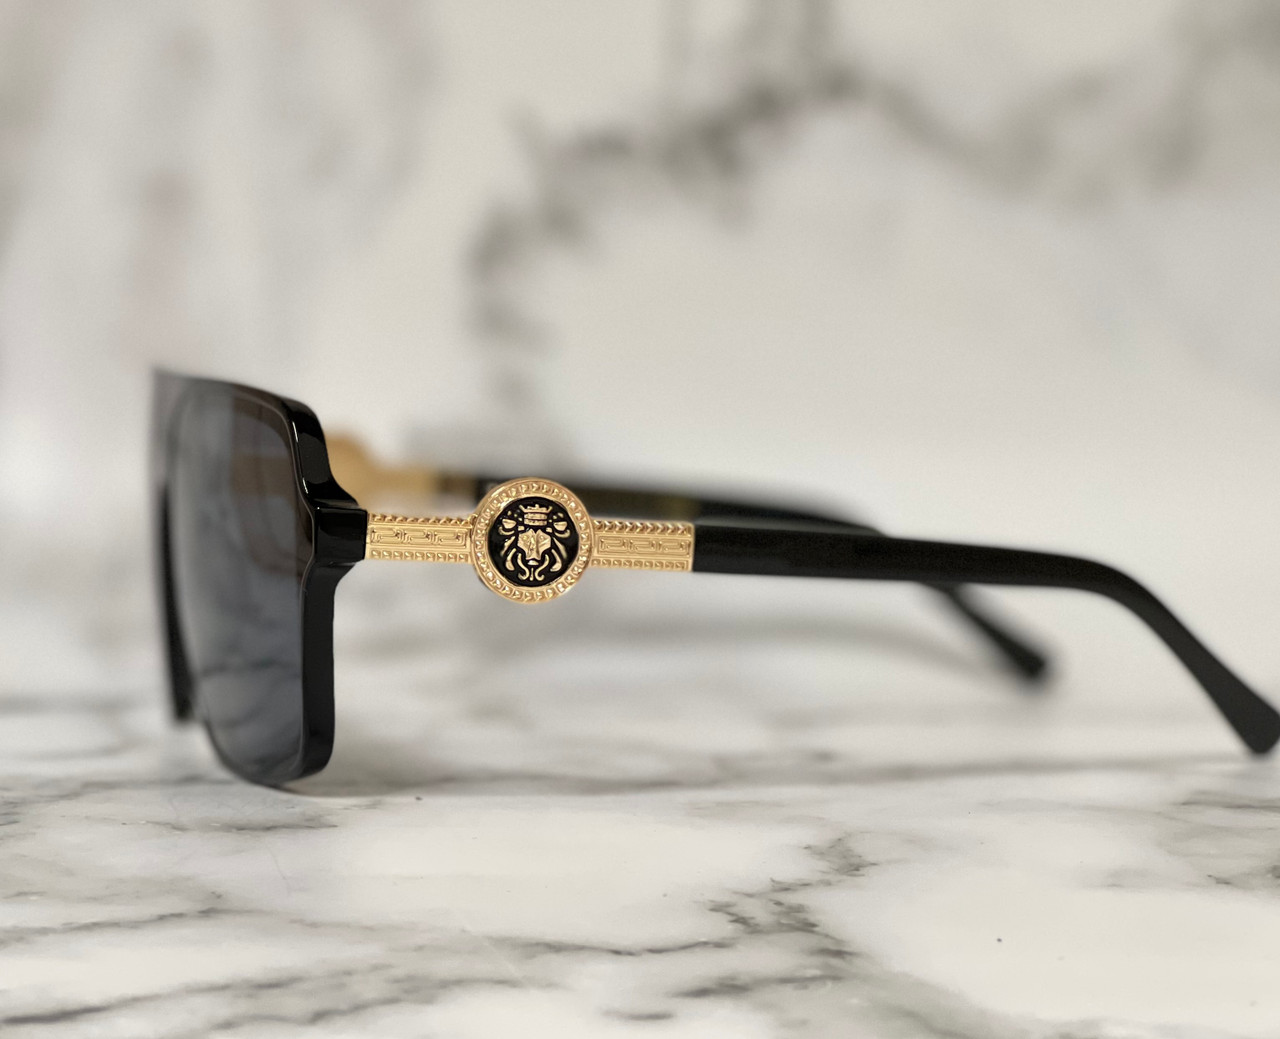 Top Quality Retro Laser Black And Gold Sunglasses For Men Shiny Gold Summer  Style With Millionaire Design Z0350W From Fashion1234568, $28.97